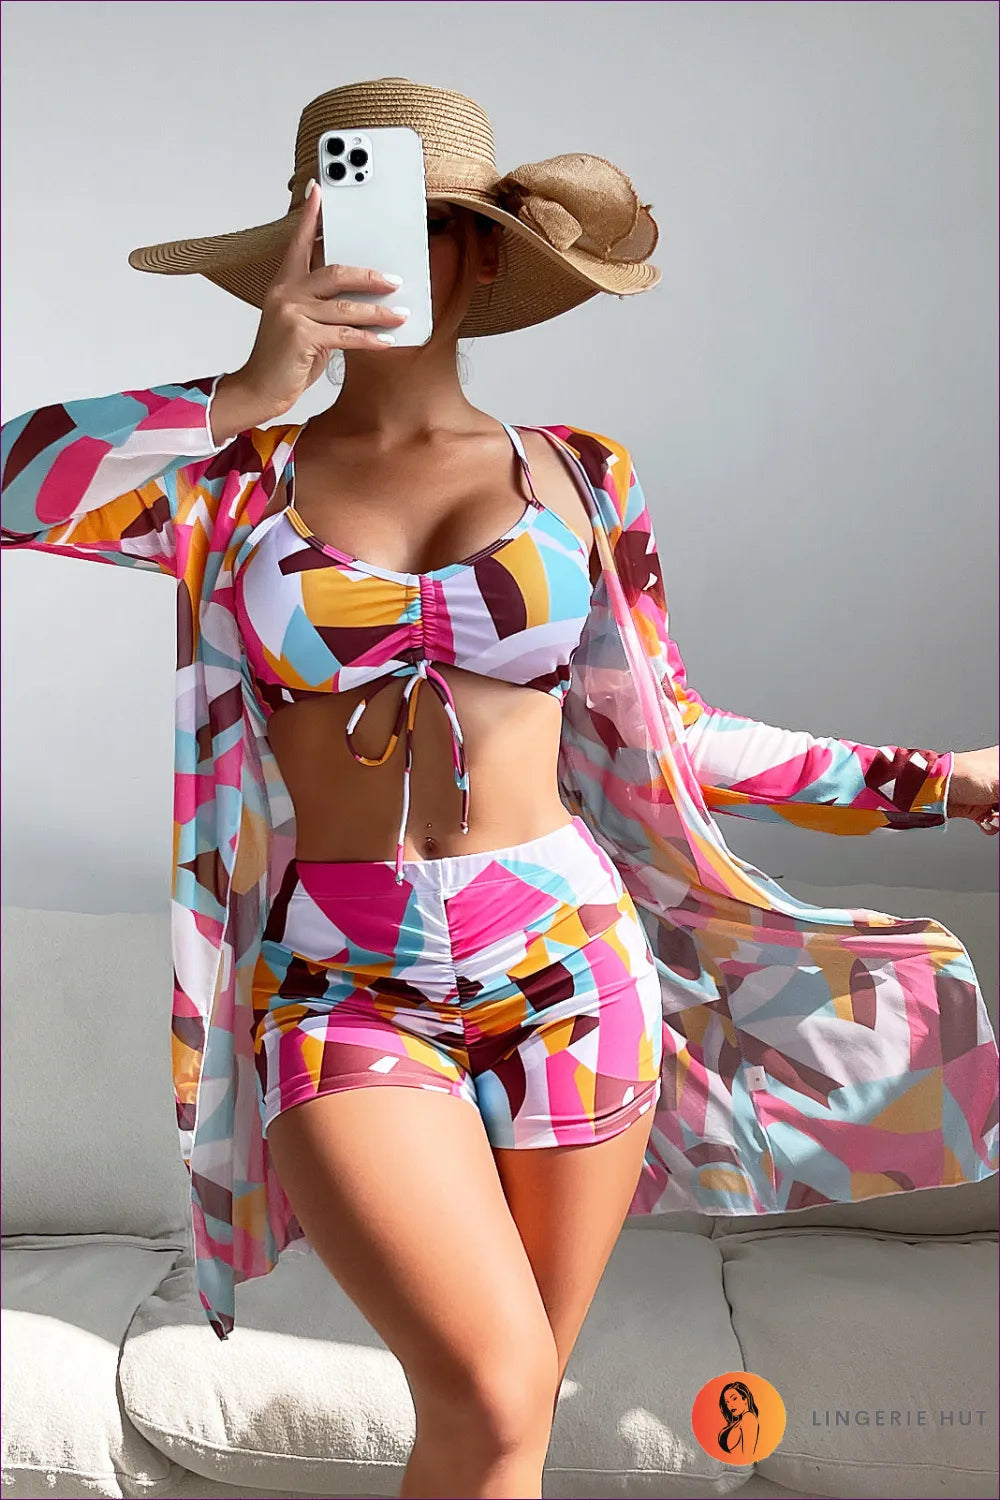 Make a Statement At The Beach With Our Stylish Three-piece Swimsuit Featuring High Waist And Long Sleeves.